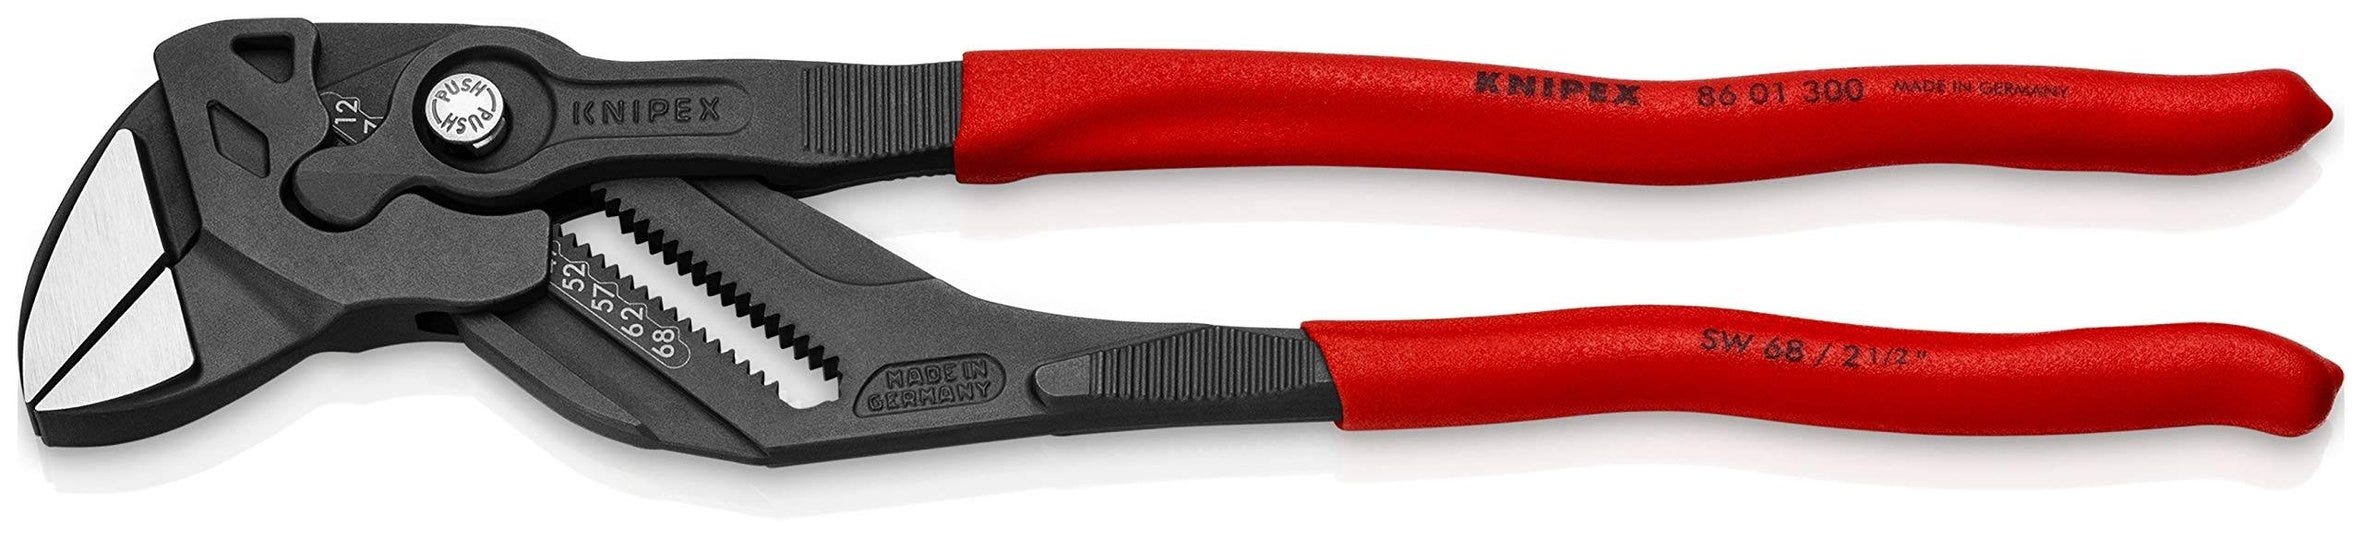 knipex-86-01-300-pliers-wrench-1